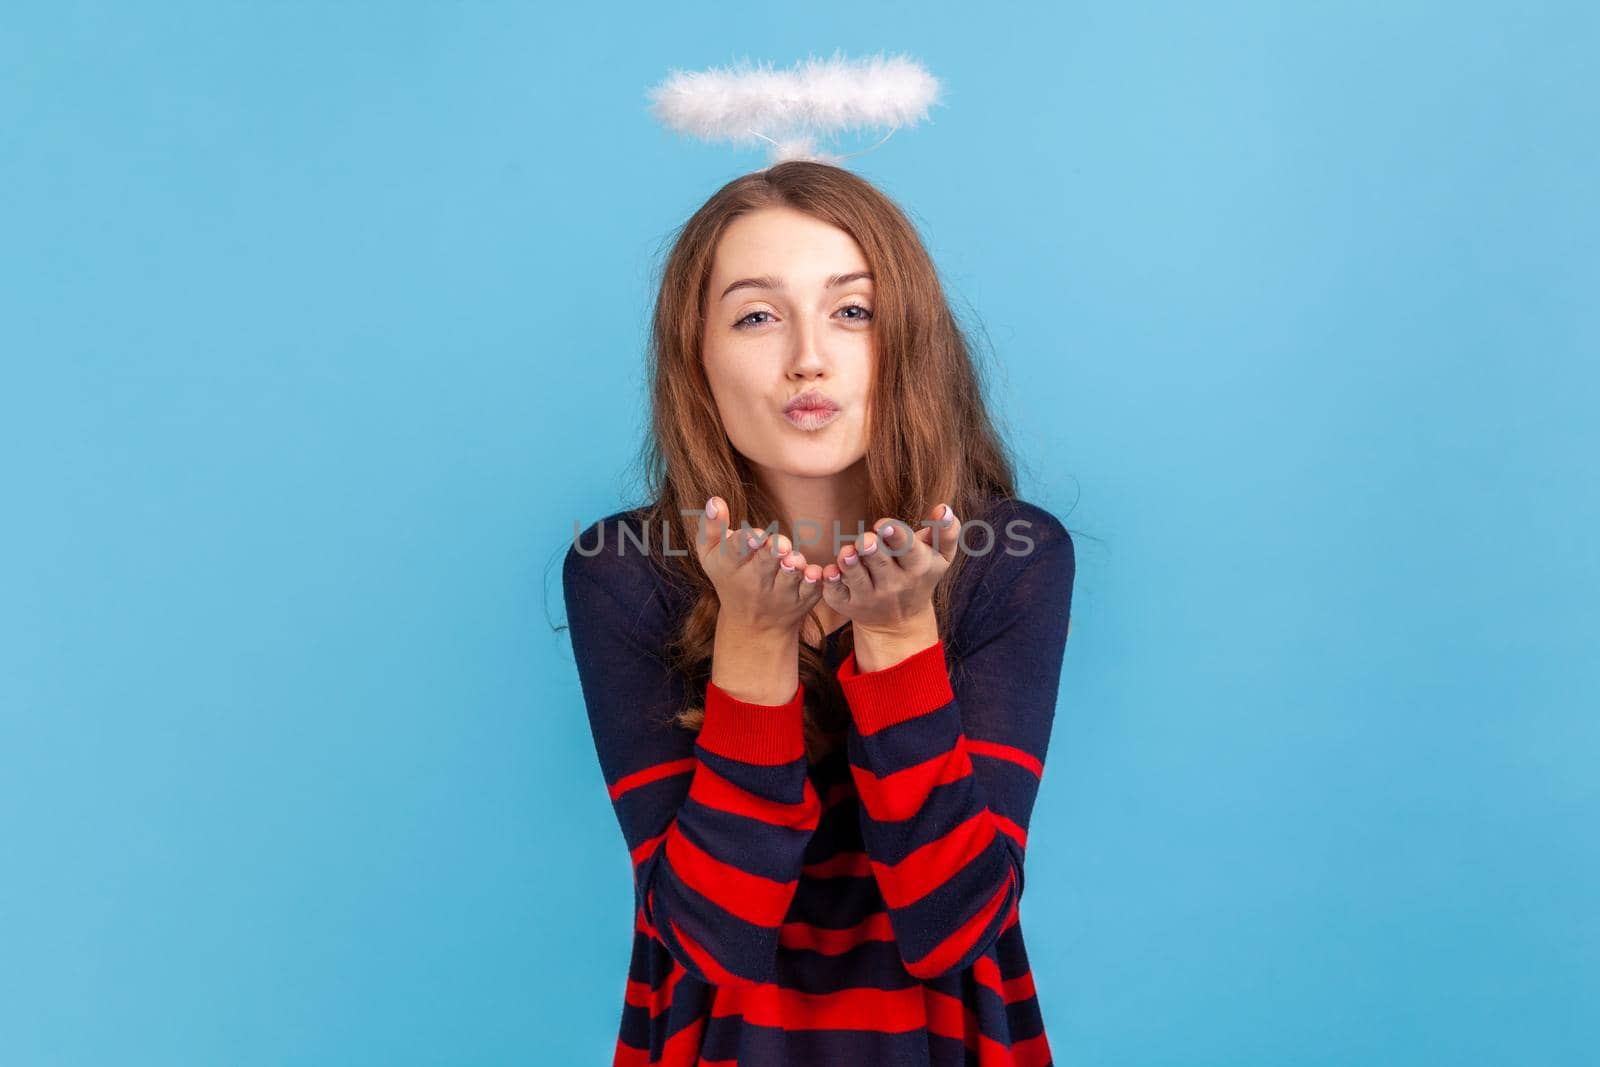 Kind woman wearing striped casual style sweater and nimb over head, sending air kiss over palms, expressing fondness, romantic feelings. Indoor studio shot isolated on blue background.